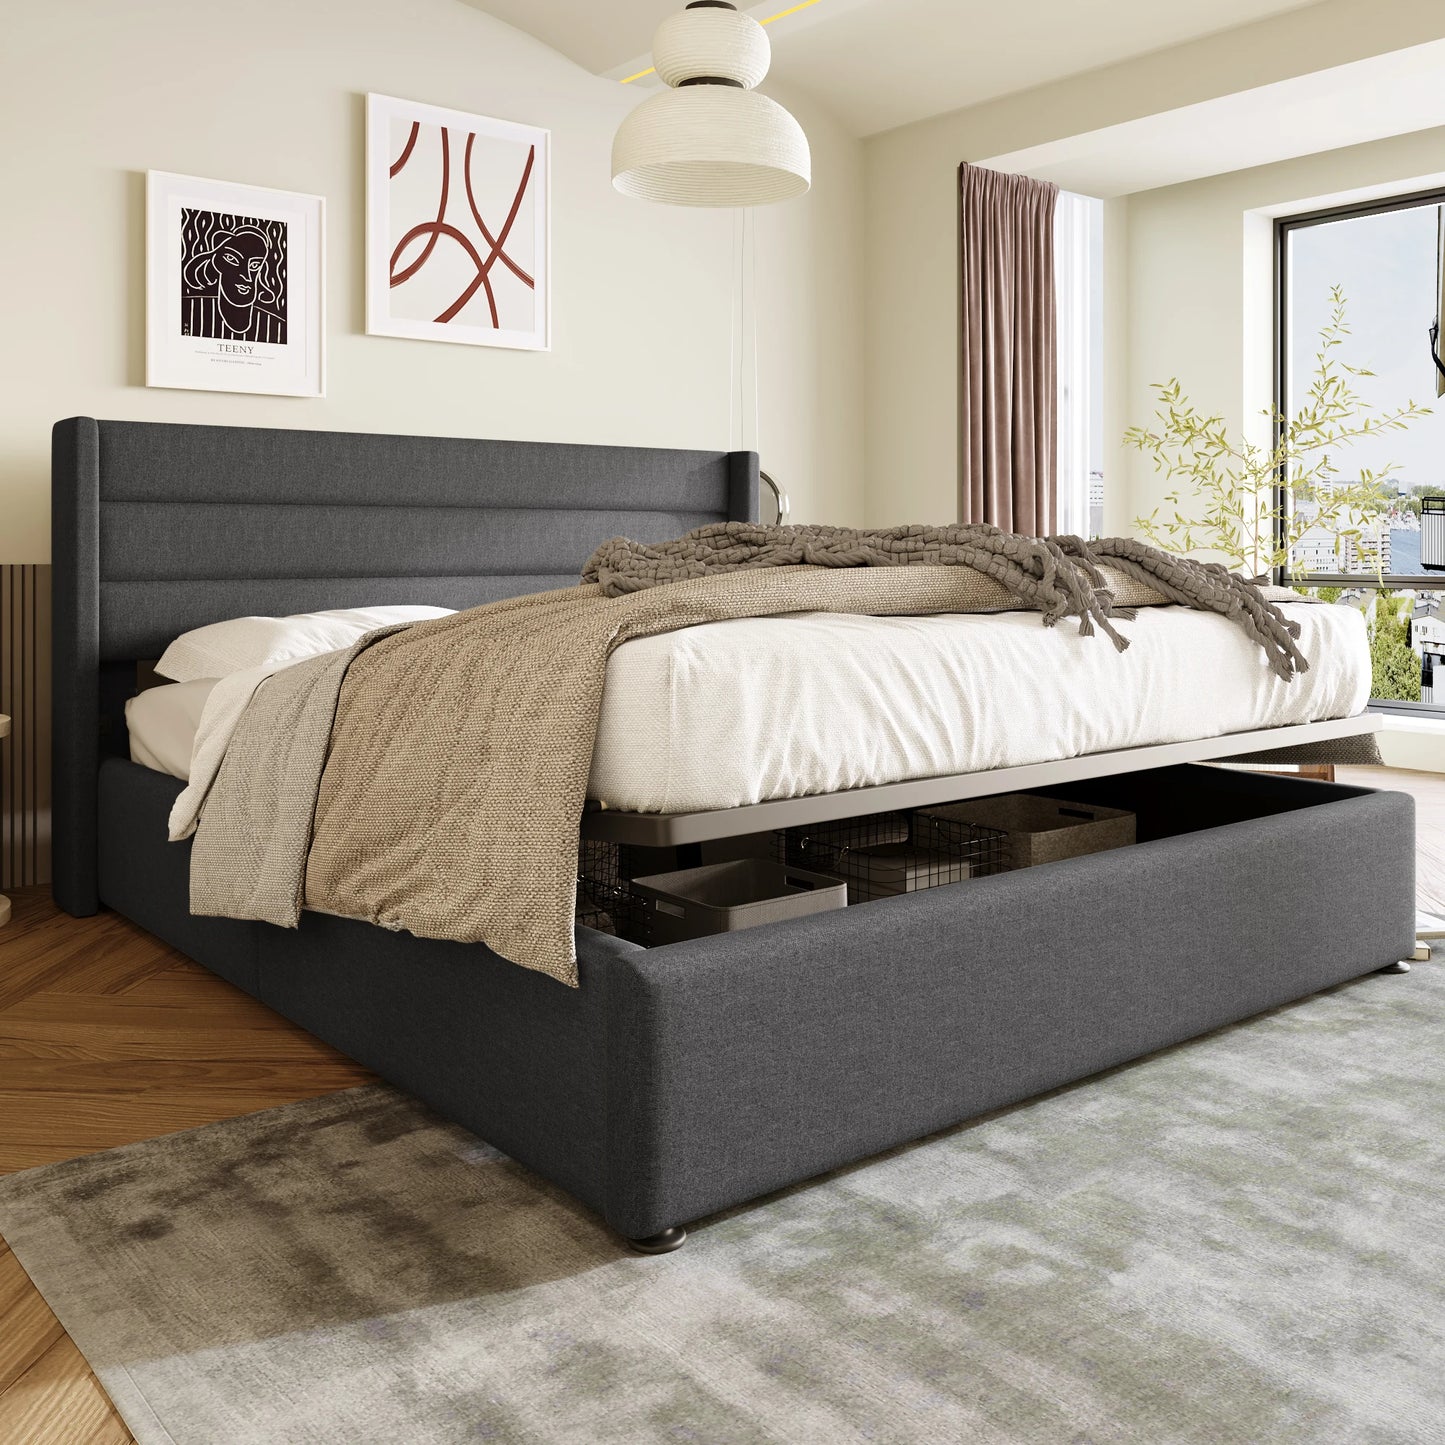 Upholstered hydraulic bed AuraRest - 140x200, 160x200, 180x200, Beds - KonnaLiving